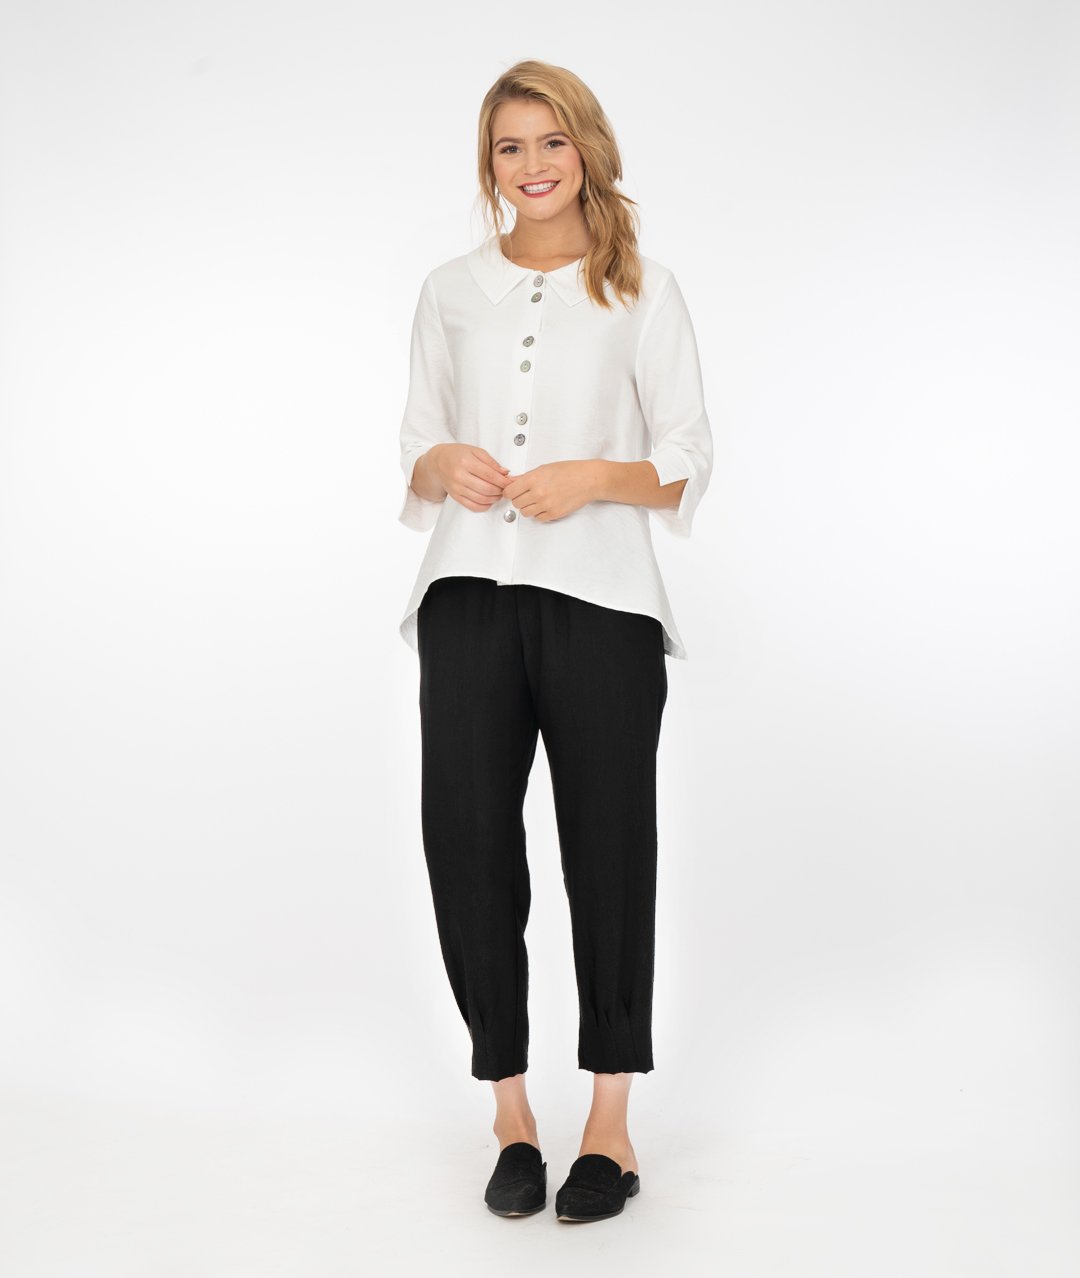 model in a white button up jacket with a collar and splits at the cuffs of the sleeves. Wearing black pants and shoes, standing in front of a white background